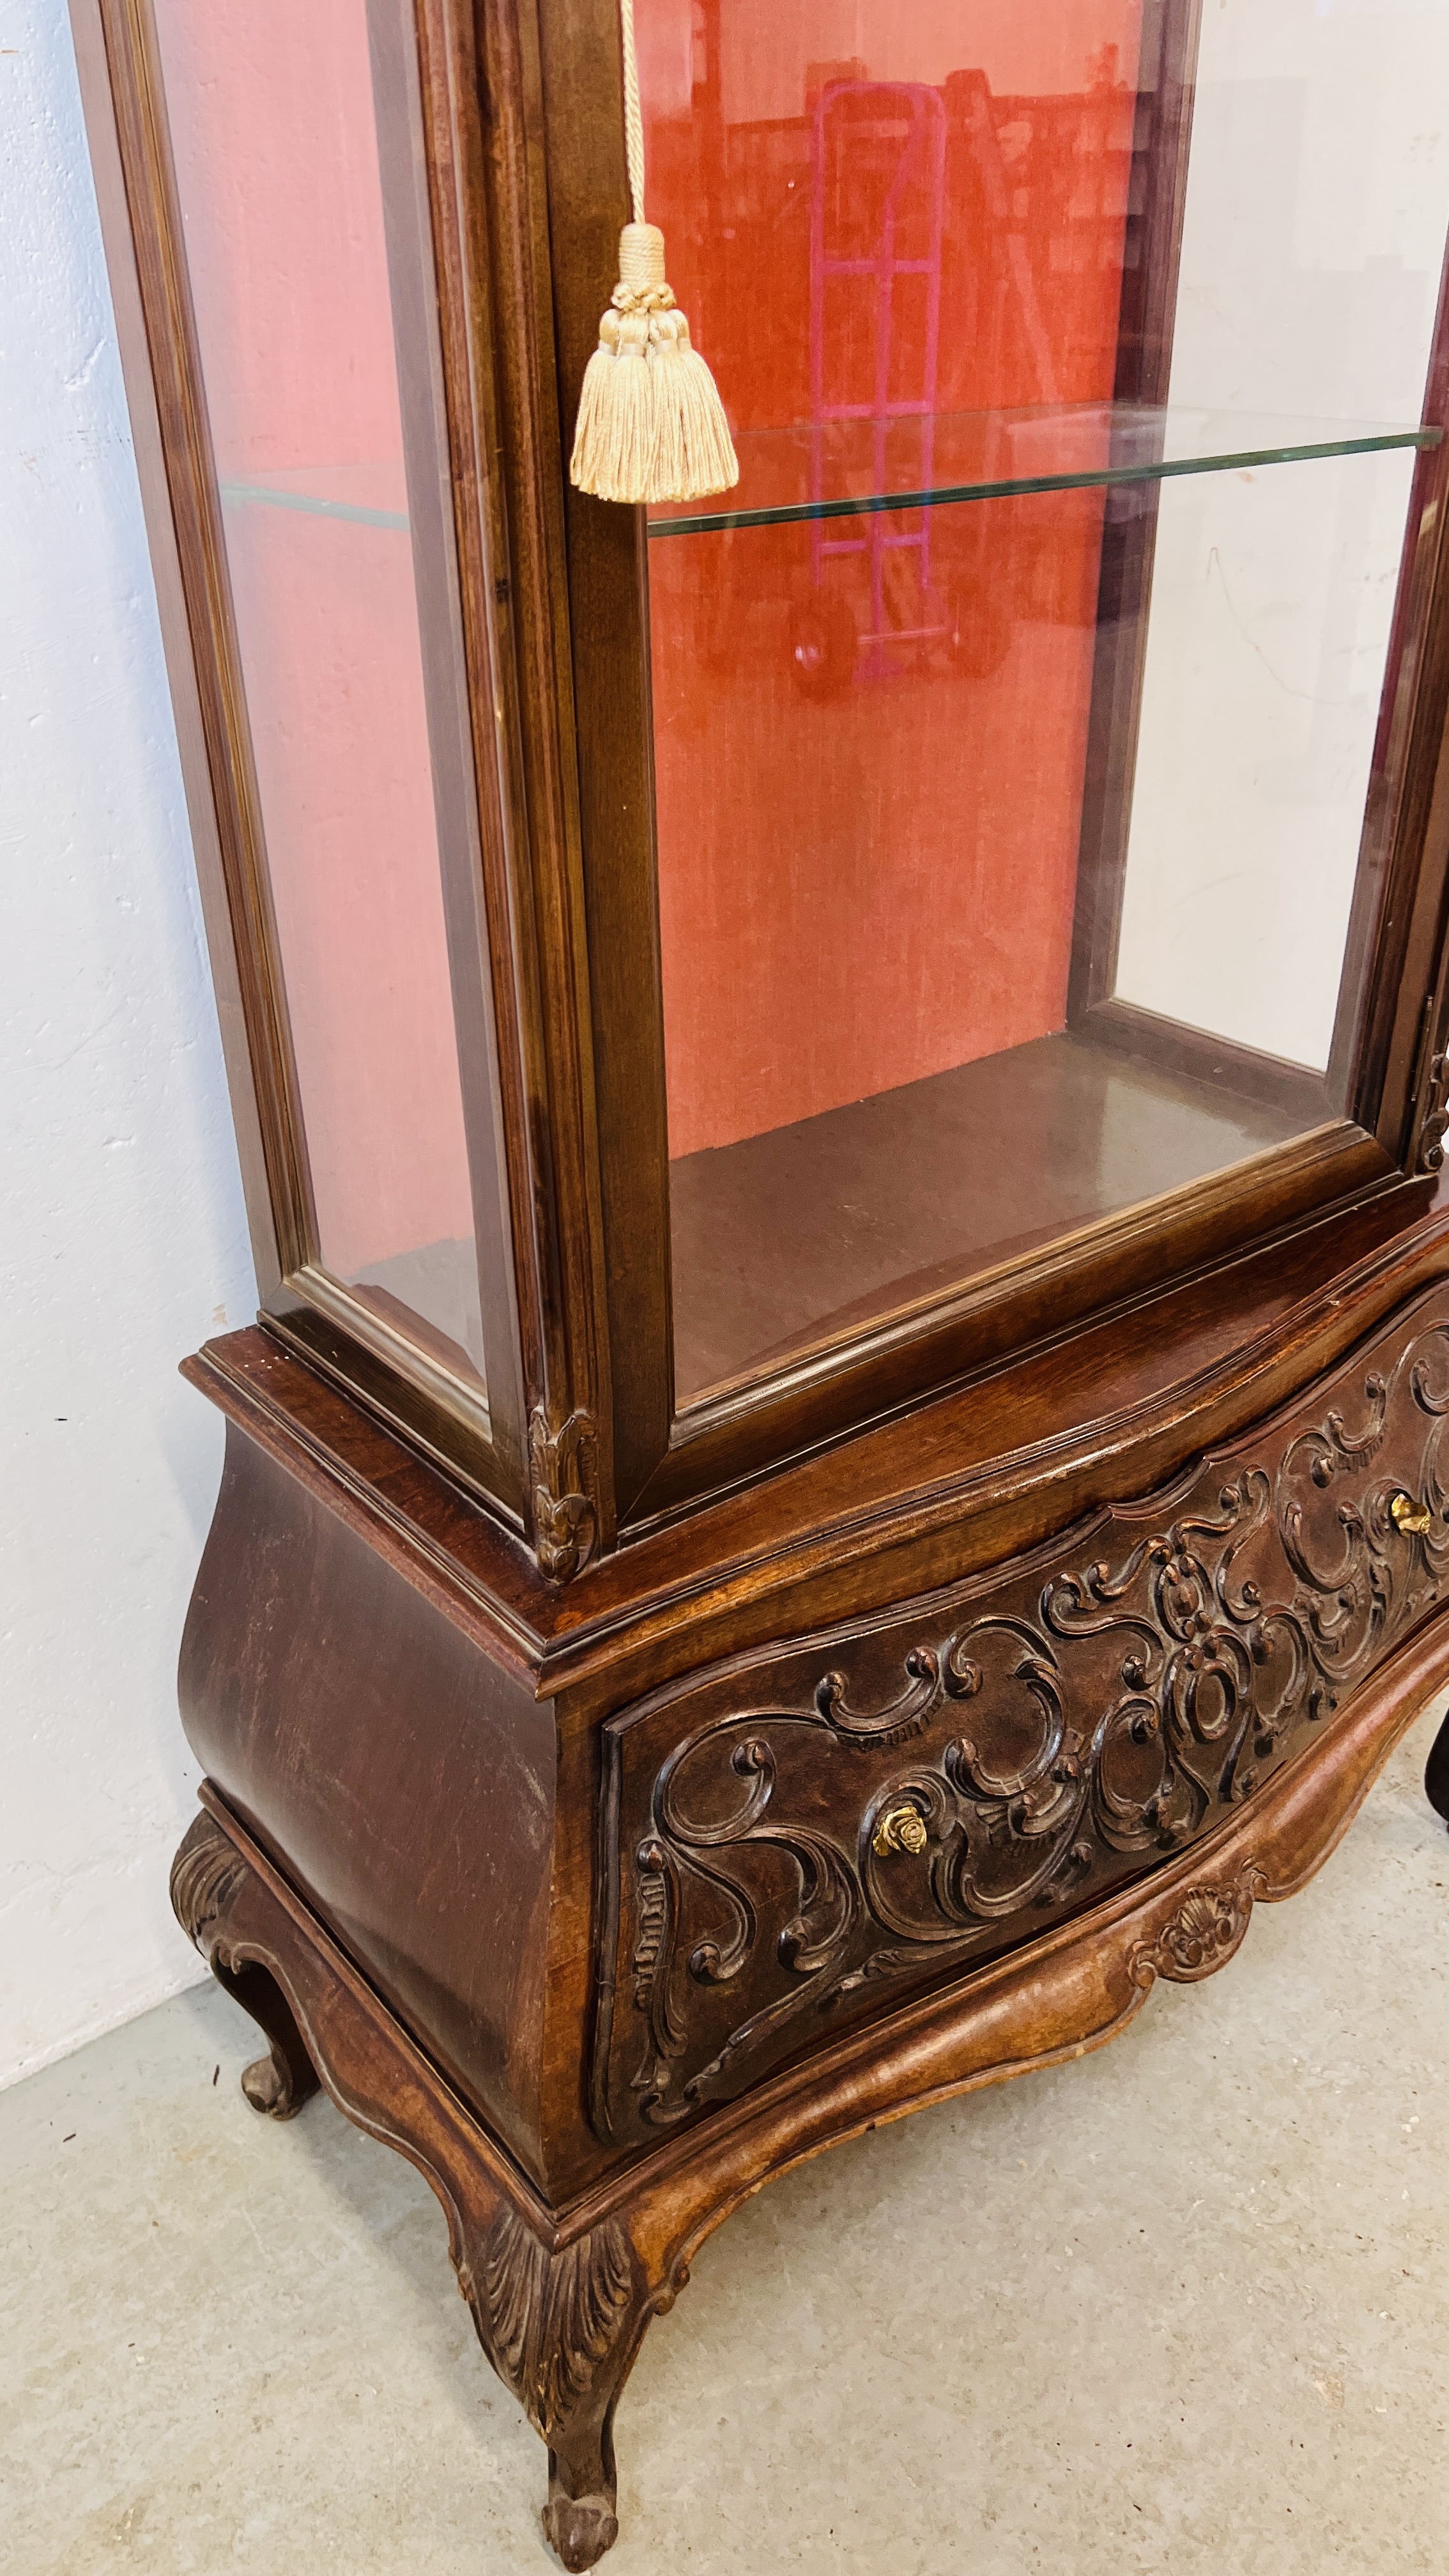 A REPRODUCTION CONTINENTAL STYLE DISPLAY CABINET WITH DRAWER TO BASE - W 83CM. D 41CM. H 183CM. - Image 6 of 9